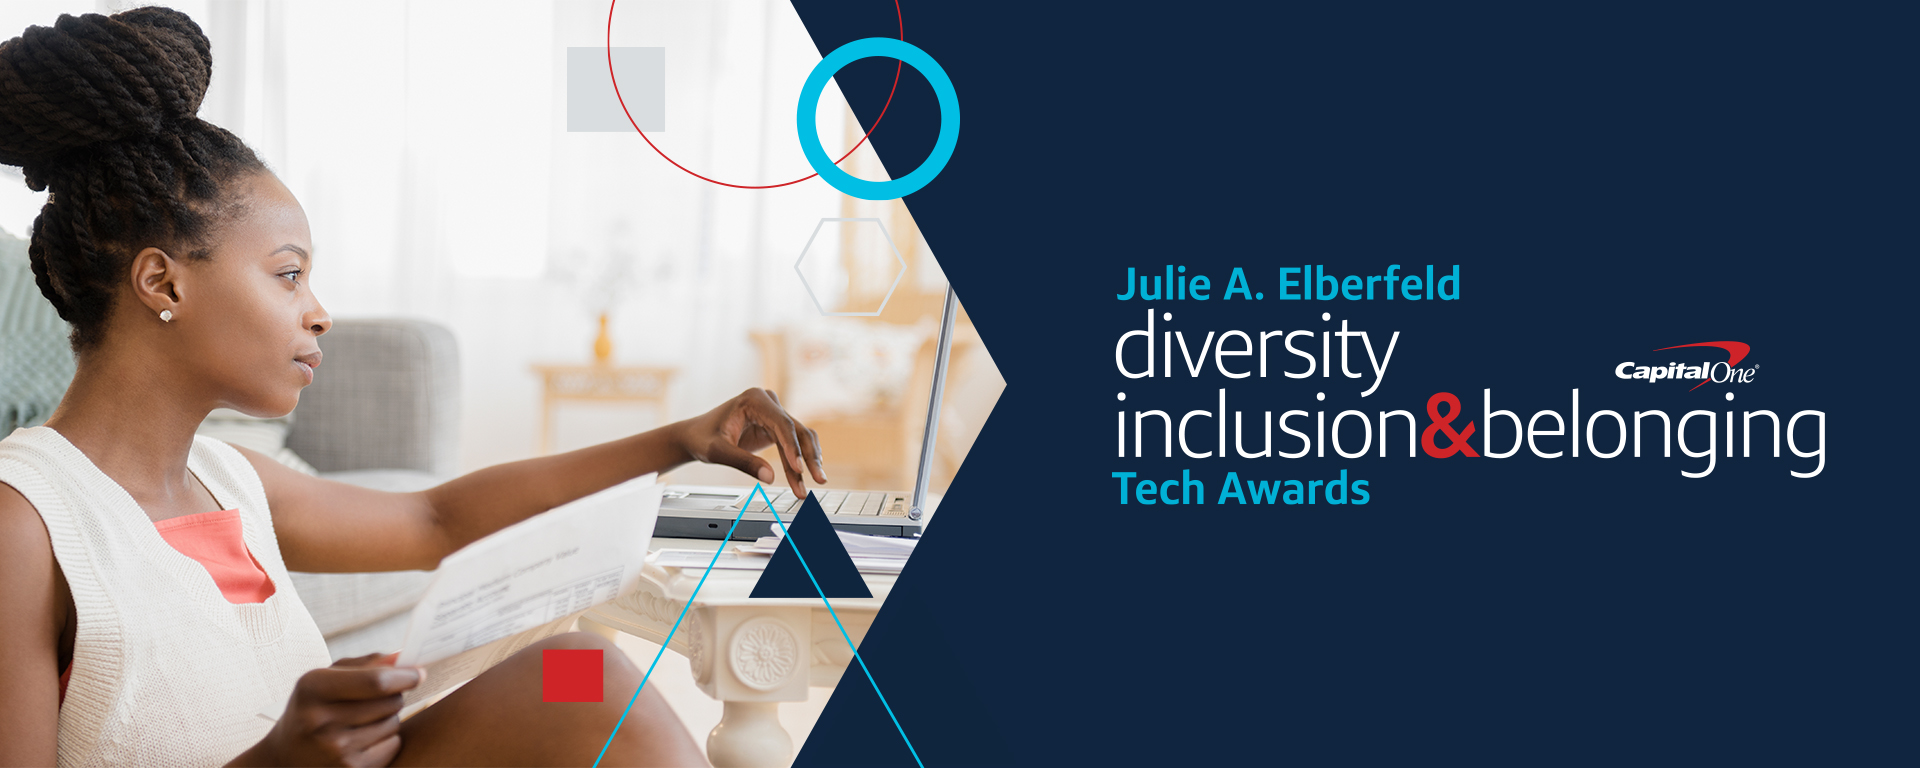 Woman sits at laptop and talks about the Julie A. Elberfeld Tech Diversity and Inclusion awards at Capital One